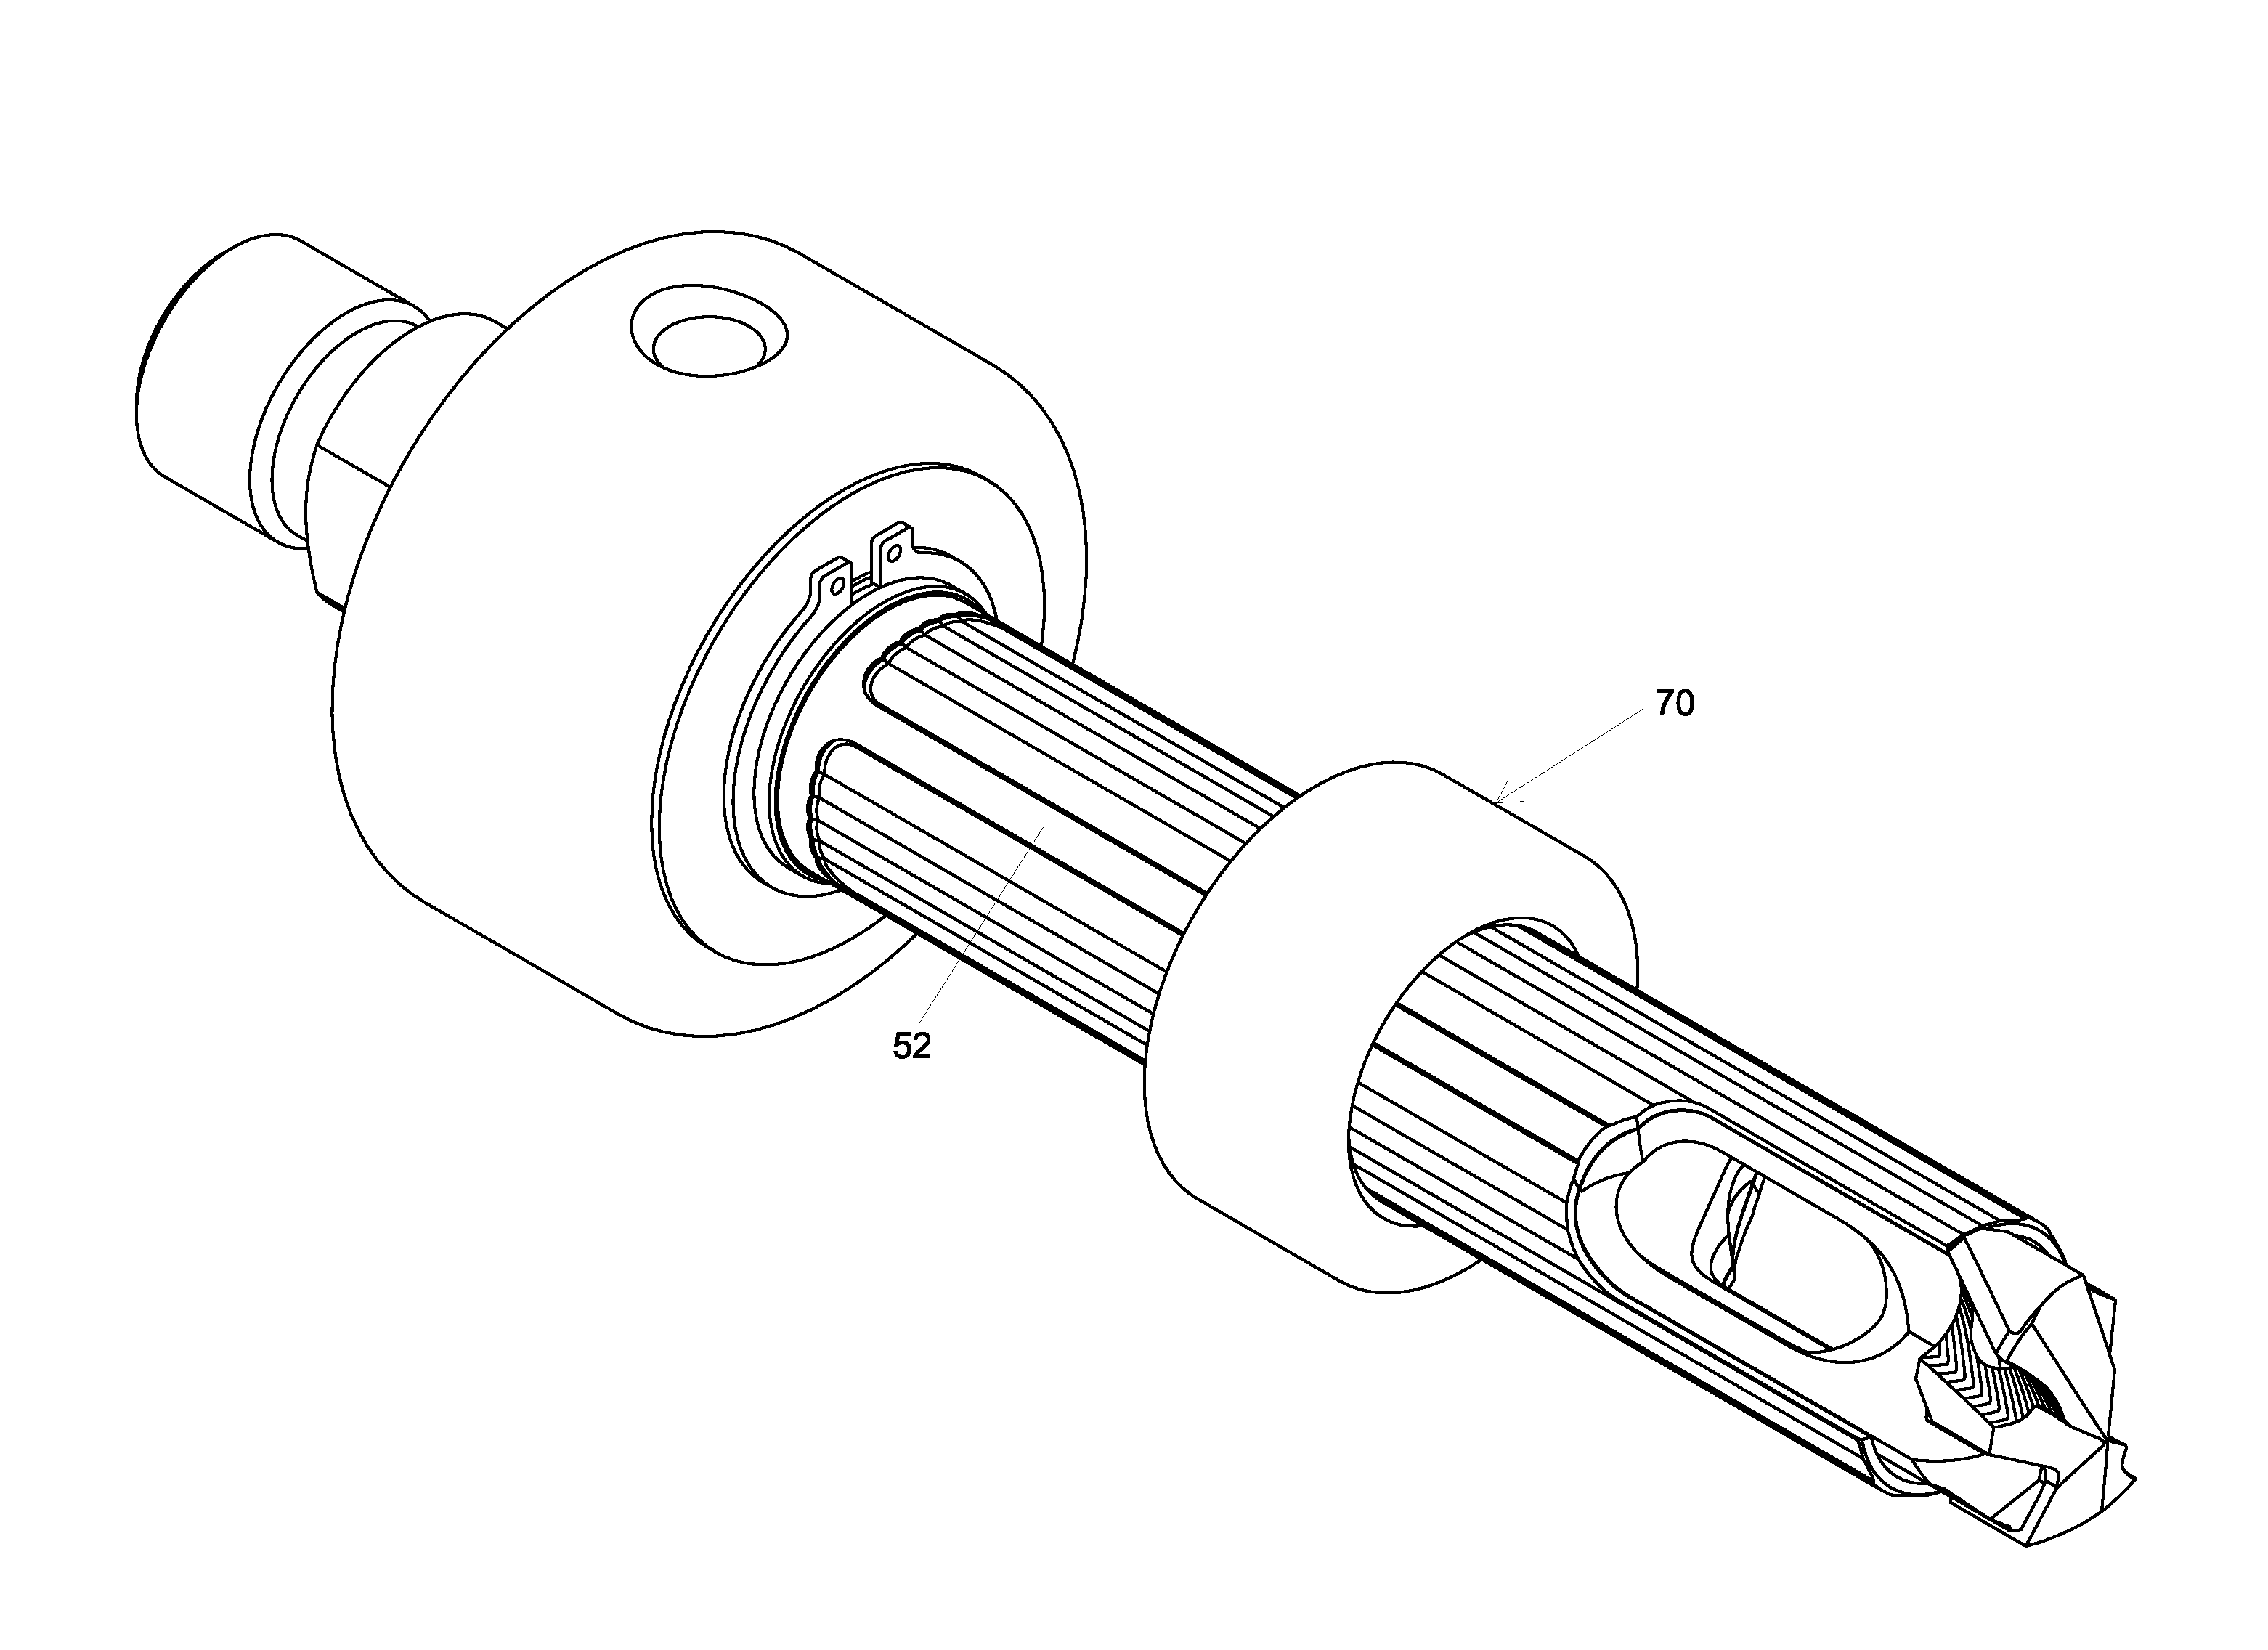 Vacuum drilling system and methods